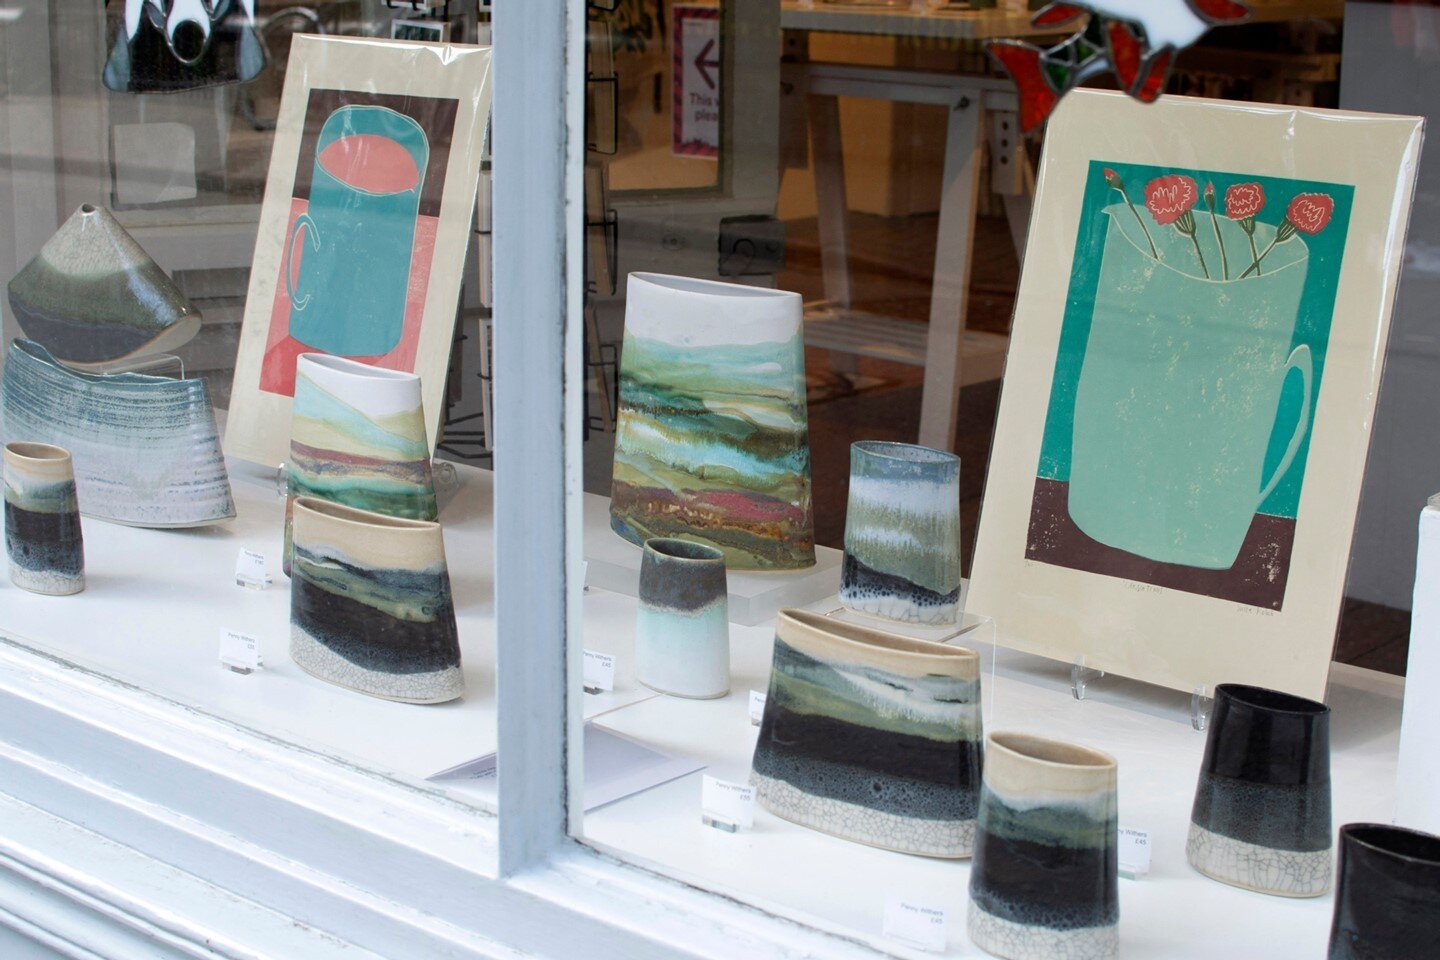 Gorgeous vessels by @pennywithers paired with original linocuts by @luizaholub in our window 😍 We love how Luiza's prints pick up on the colours in Penny's glazes!⁠
⁠
⁠
www.cambridgecrafts.co.uk⁠
⁠
⁠
⁠
#cambridge #lovecambridge #artgallery #independ